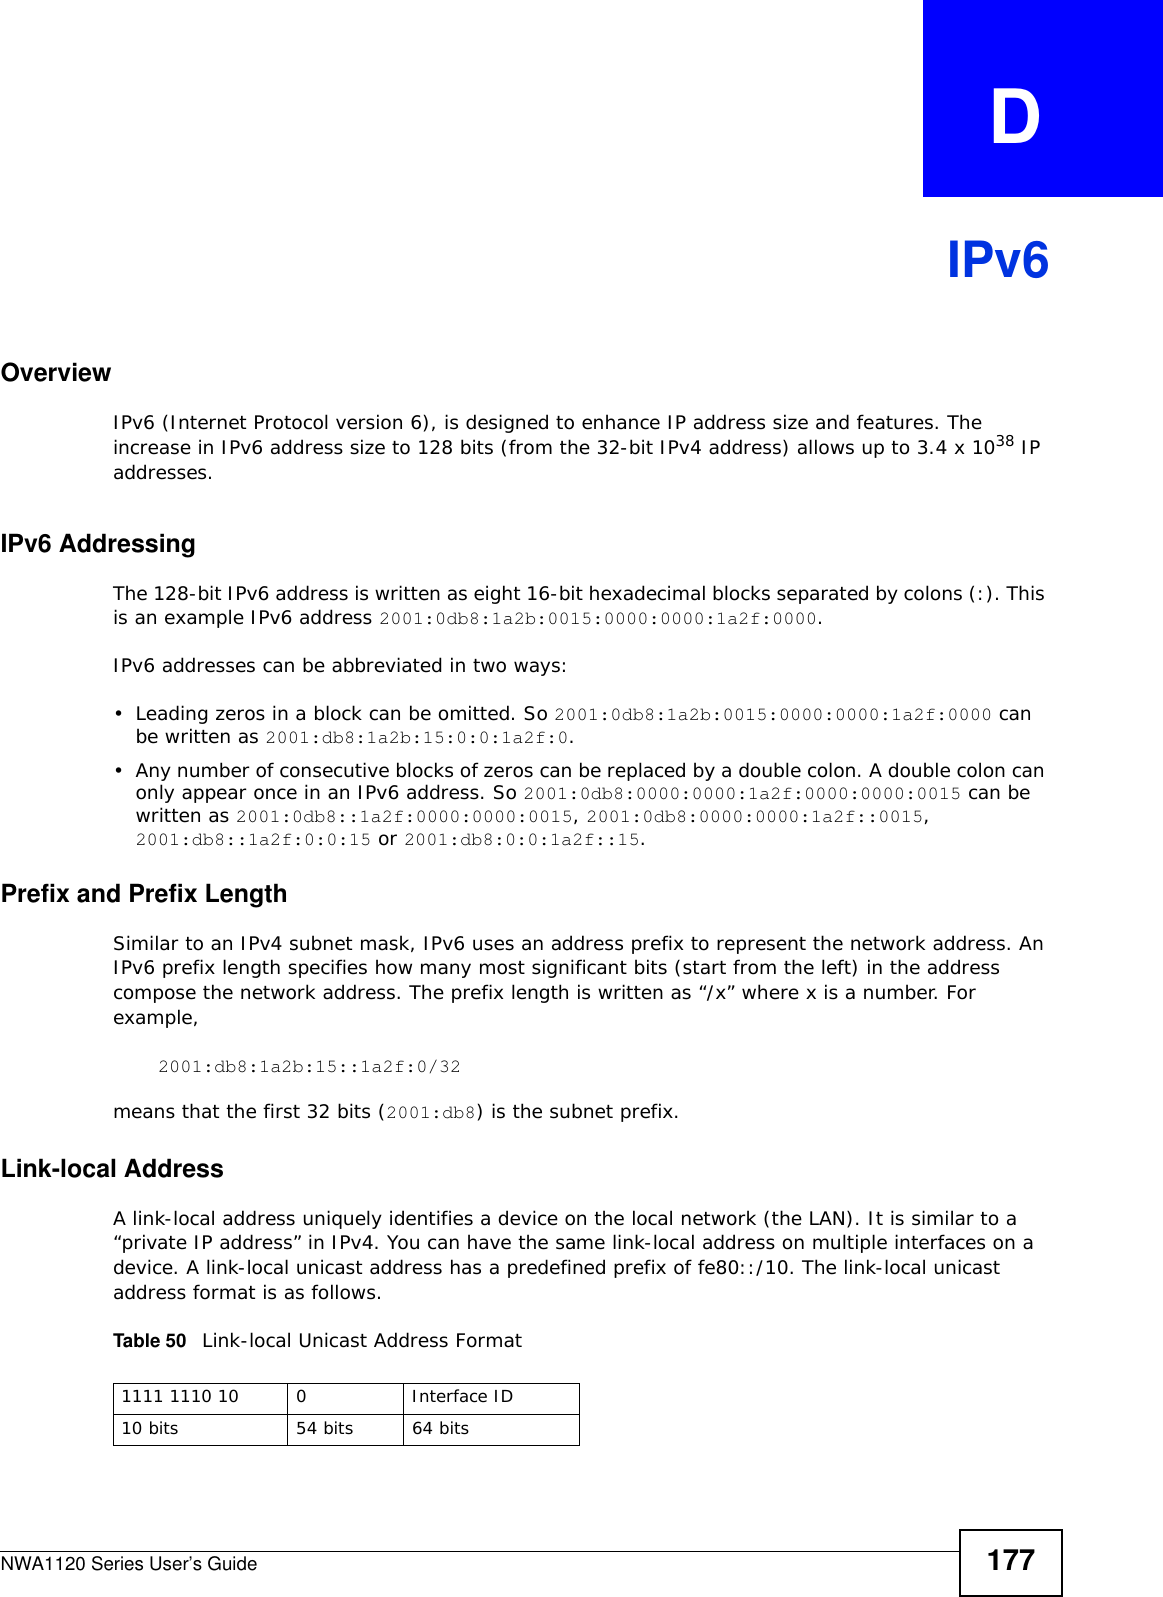 NWA1120 Series User’s Guide 177APPENDIX   DIPv6OverviewIPv6 (Internet Protocol version 6), is designed to enhance IP address size and features. The increase in IPv6 address size to 128 bits (from the 32-bit IPv4 address) allows up to 3.4 x 1038 IP addresses. IPv6 AddressingThe 128-bit IPv6 address is written as eight 16-bit hexadecimal blocks separated by colons (:). This is an example IPv6 address 2001:0db8:1a2b:0015:0000:0000:1a2f:0000. IPv6 addresses can be abbreviated in two ways:• Leading zeros in a block can be omitted. So 2001:0db8:1a2b:0015:0000:0000:1a2f:0000 can be written as 2001:db8:1a2b:15:0:0:1a2f:0. • Any number of consecutive blocks of zeros can be replaced by a double colon. A double colon can only appear once in an IPv6 address. So 2001:0db8:0000:0000:1a2f:0000:0000:0015 can be written as 2001:0db8::1a2f:0000:0000:0015, 2001:0db8:0000:0000:1a2f::0015, 2001:db8::1a2f:0:0:15 or 2001:db8:0:0:1a2f::15.Prefix and Prefix LengthSimilar to an IPv4 subnet mask, IPv6 uses an address prefix to represent the network address. An IPv6 prefix length specifies how many most significant bits (start from the left) in the address compose the network address. The prefix length is written as “/x” where x is a number. For example, 2001:db8:1a2b:15::1a2f:0/32means that the first 32 bits (2001:db8) is the subnet prefix. Link-local AddressA link-local address uniquely identifies a device on the local network (the LAN). It is similar to a “private IP address” in IPv4. You can have the same link-local address on multiple interfaces on a device. A link-local unicast address has a predefined prefix of fe80::/10. The link-local unicast address format is as follows.Table 50   Link-local Unicast Address Format1111 1110 10 0 Interface ID10 bits 54 bits 64 bits